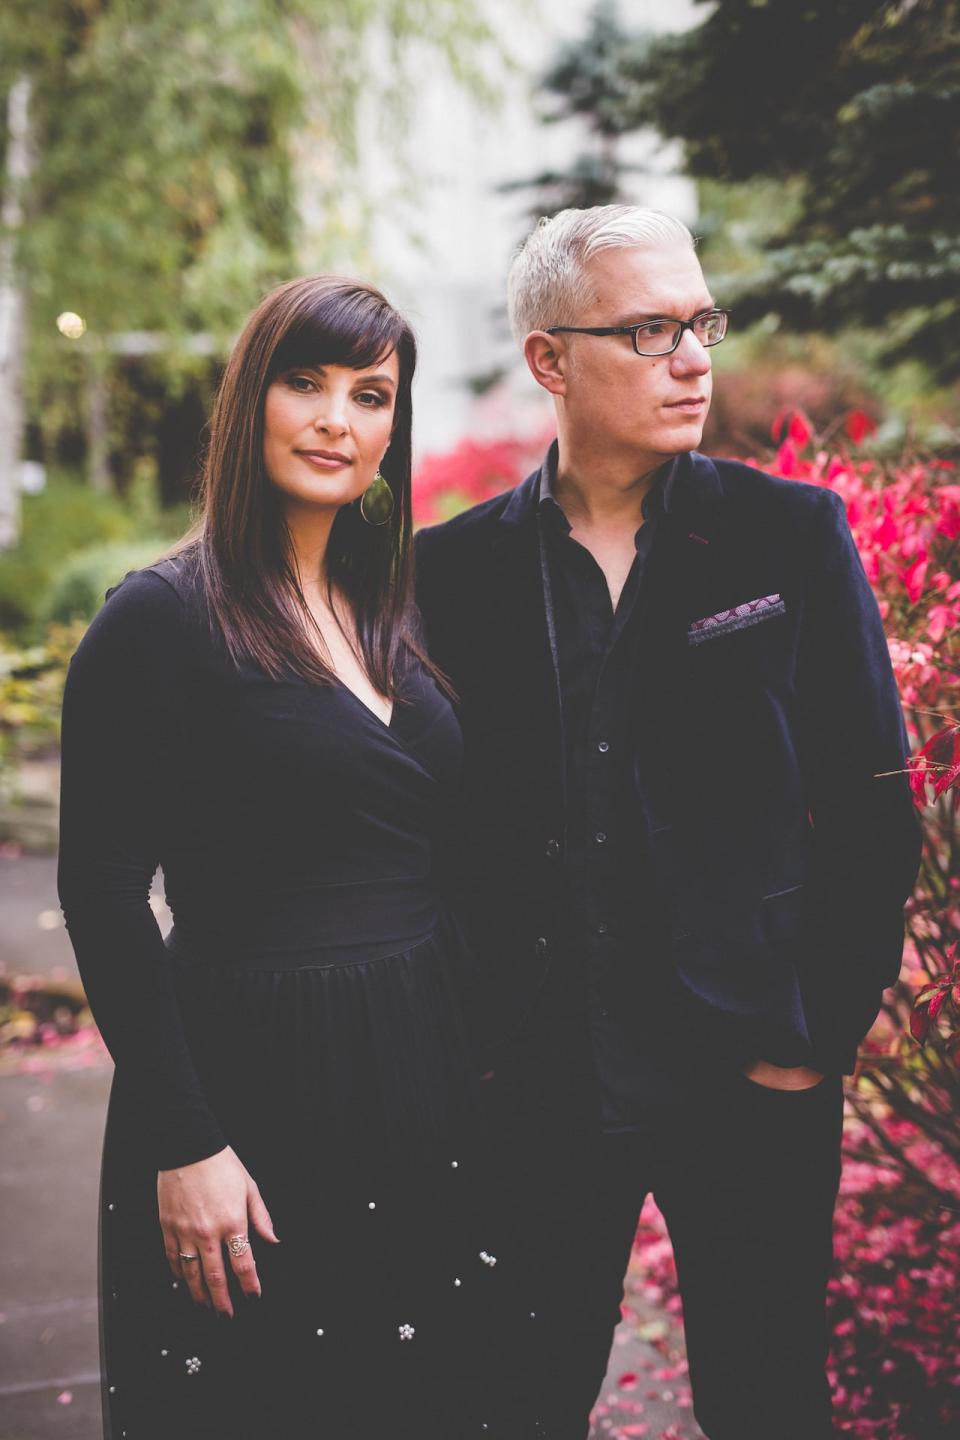 Ian Foster and Nancy Hynes are touring eastern Newfoundland with their award-winning Christmas album A Week in December.